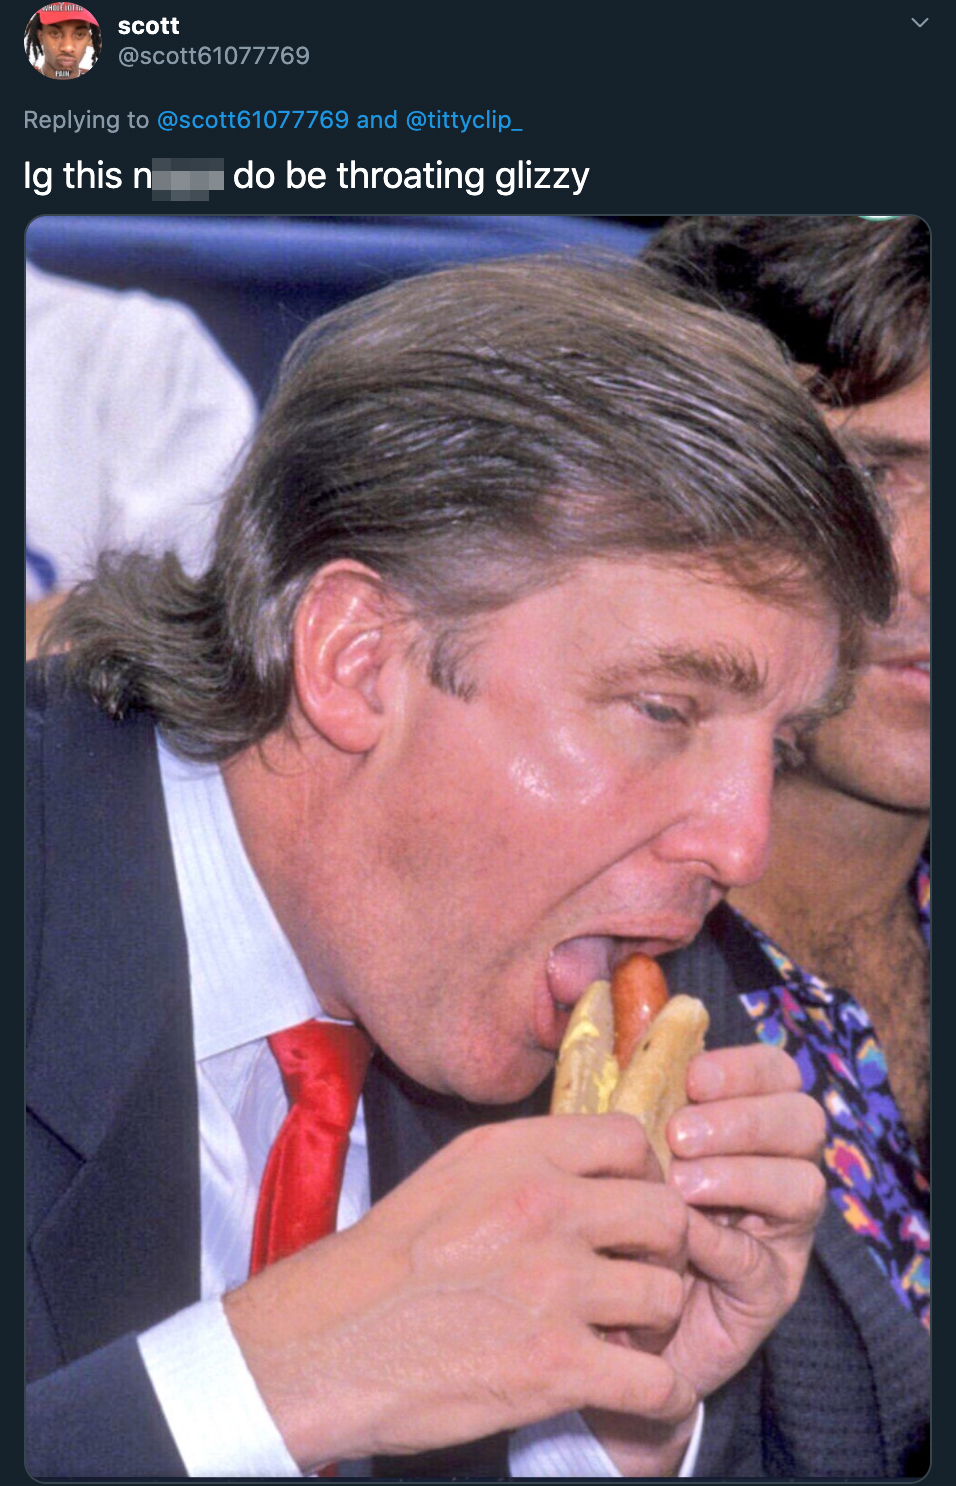 trump hot dog - Ig this do be throating glizzy